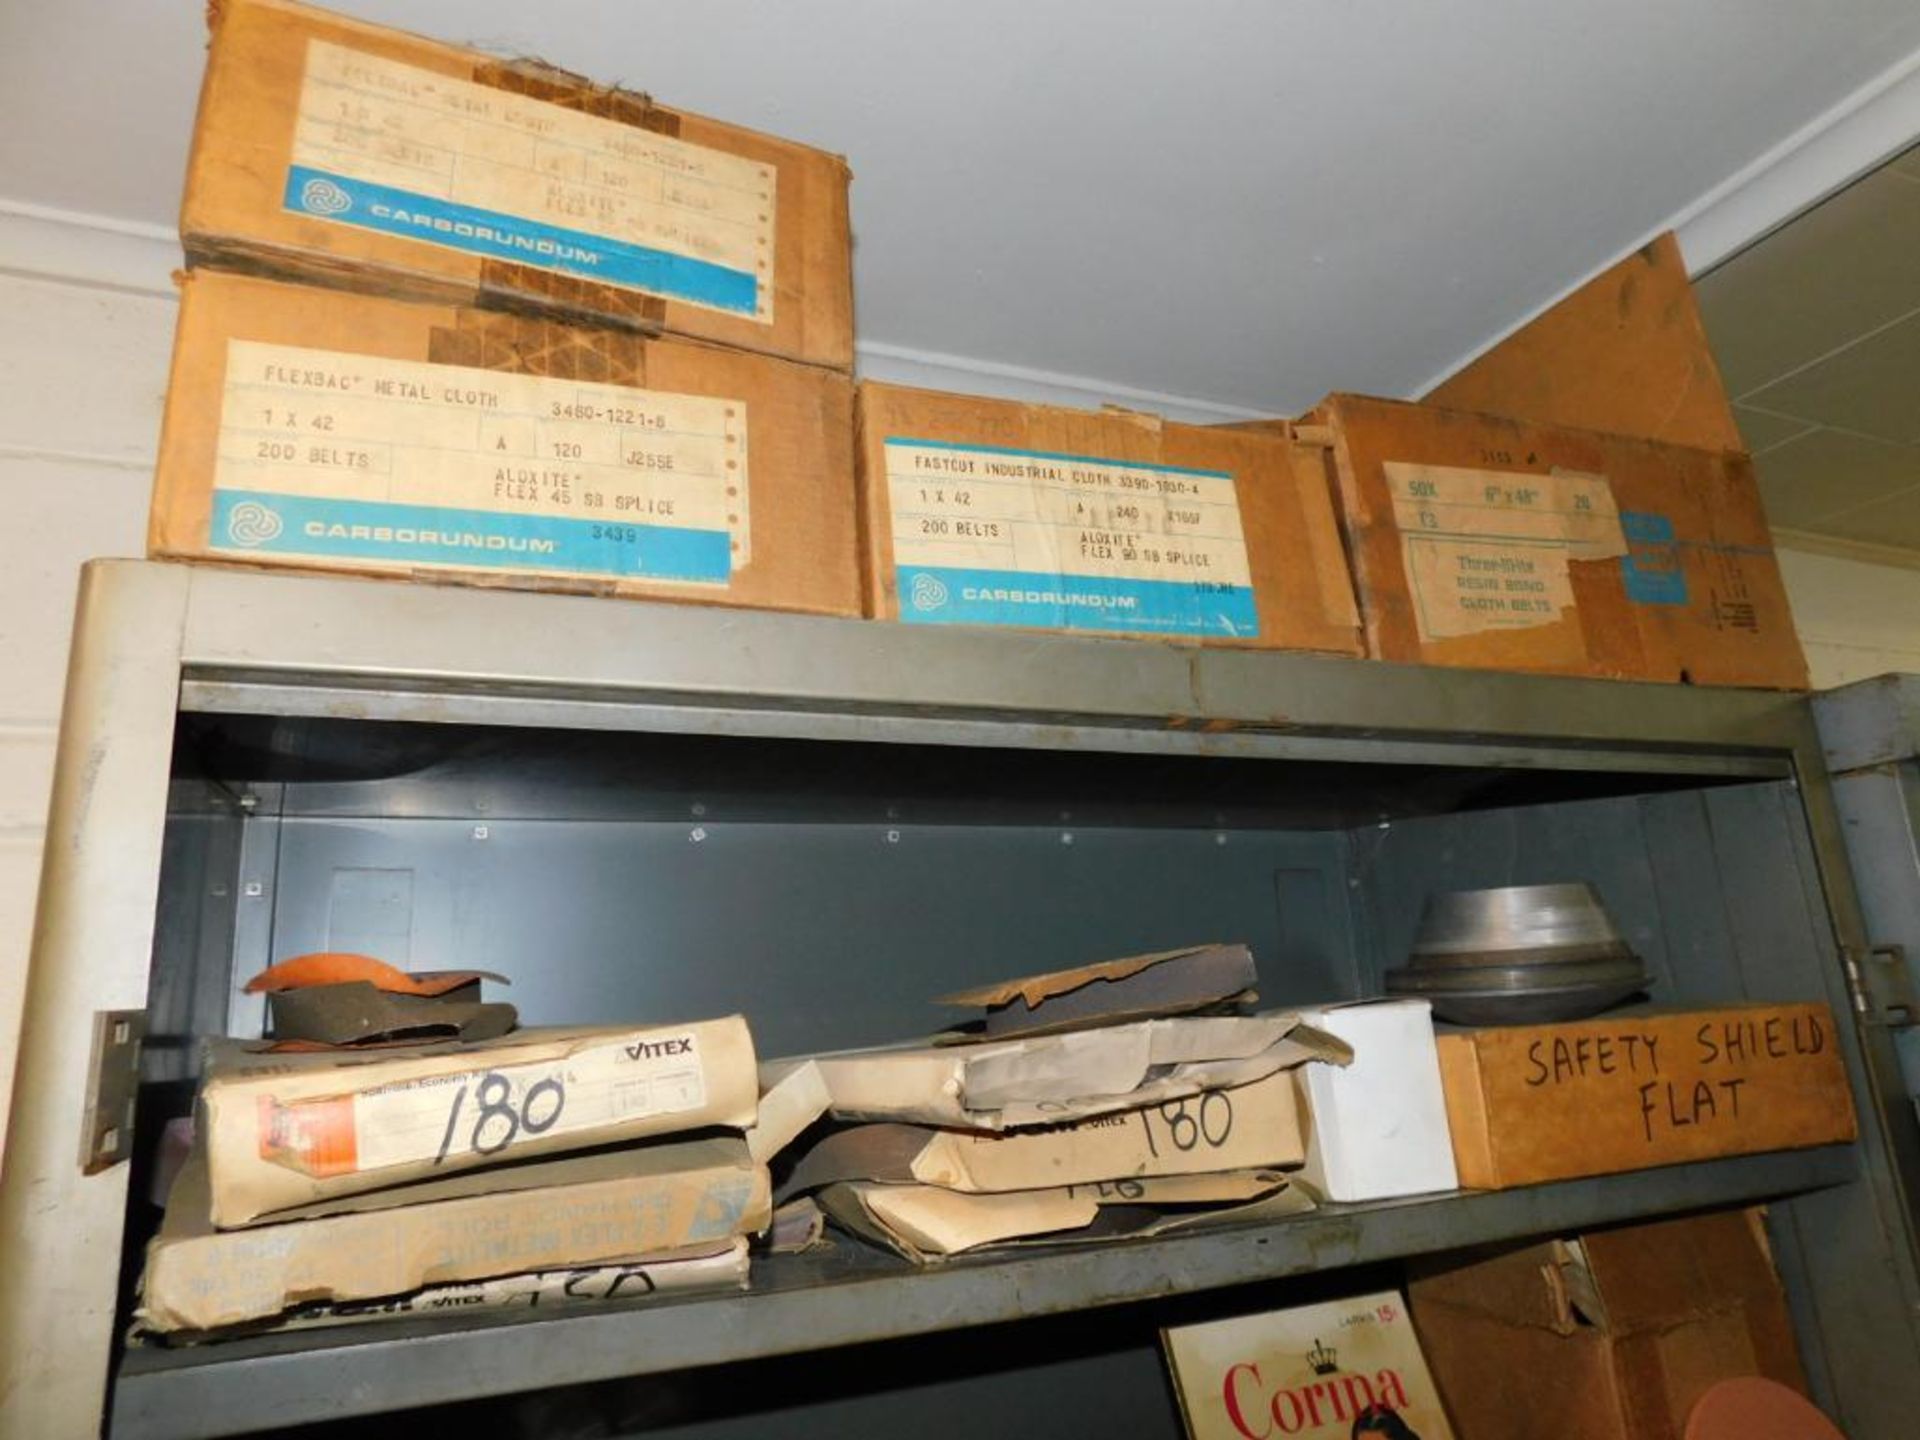 LOT: Contents of Rack: Large Quantity of Assorted Grinding Wheels, Cut Off Wheels, Polishing Stones, - Image 4 of 15